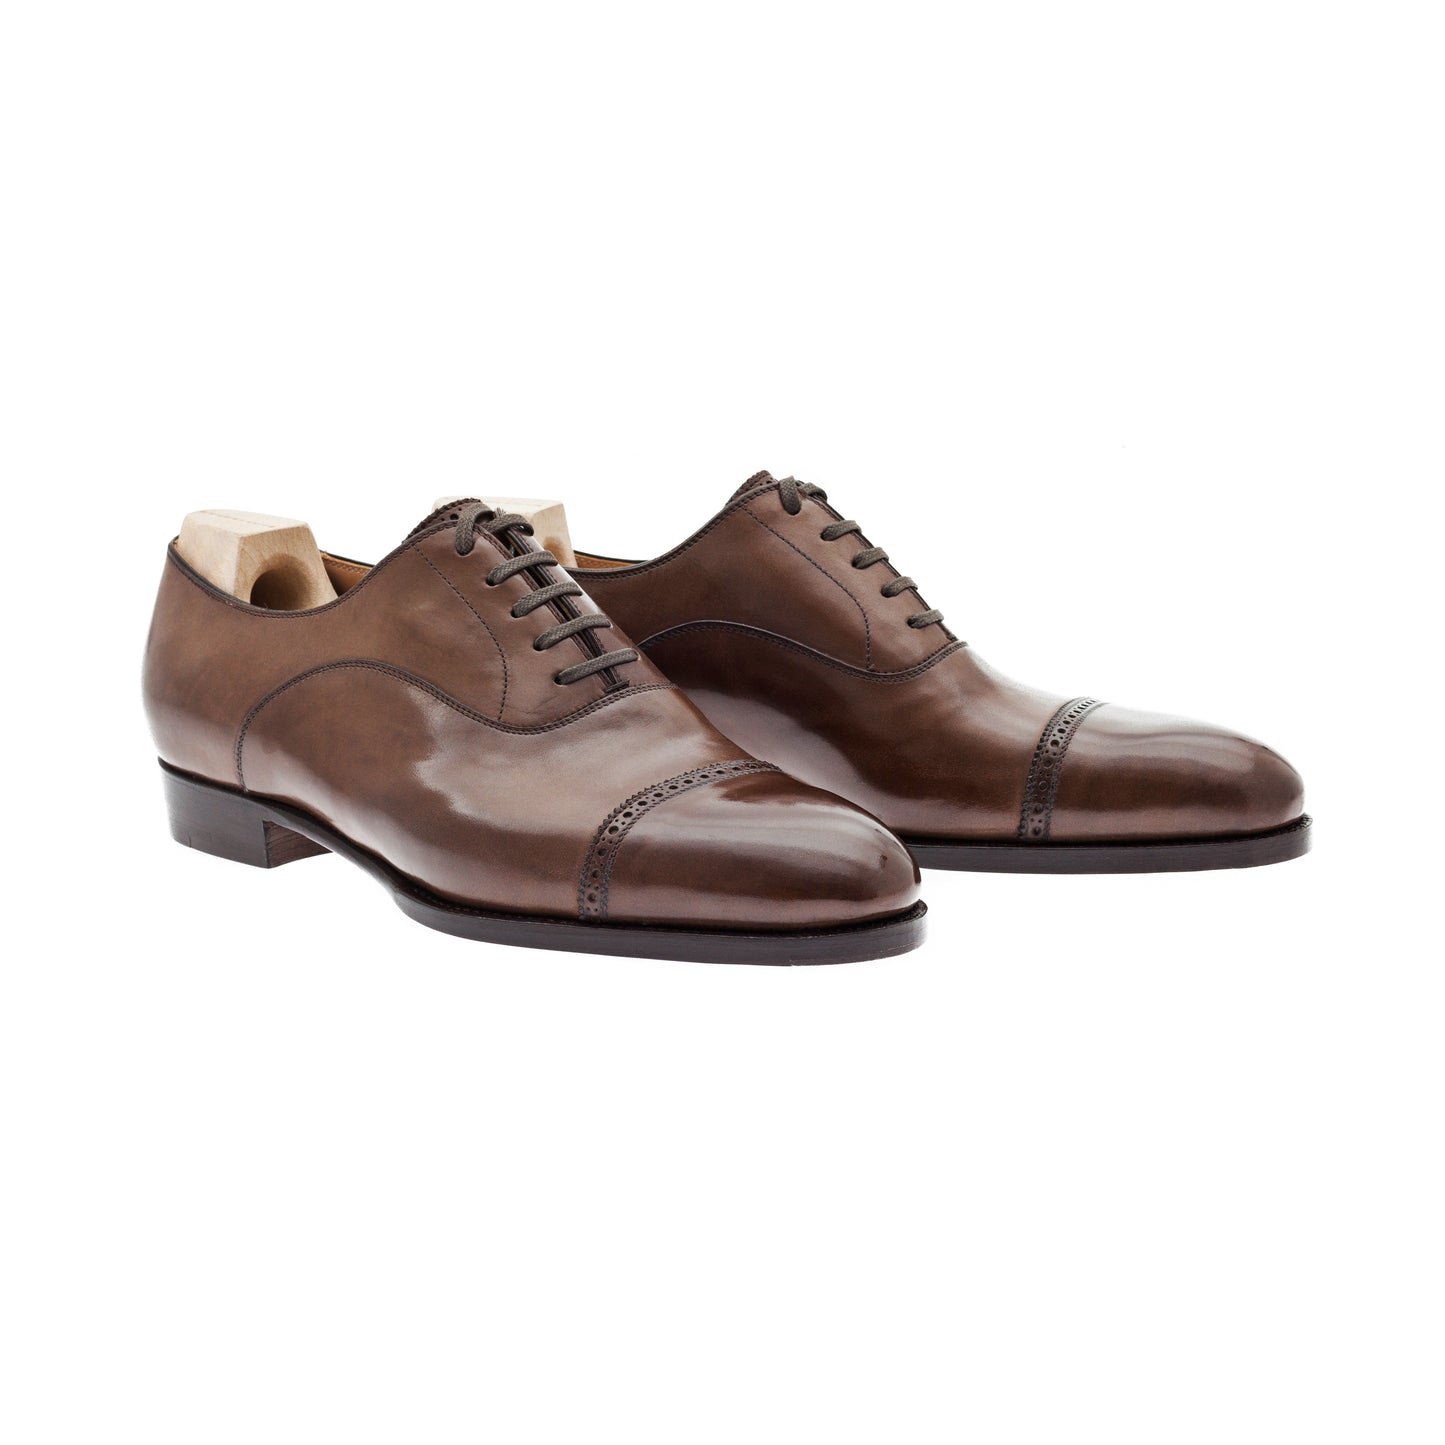 Oxford with straigh cap toe, gimped